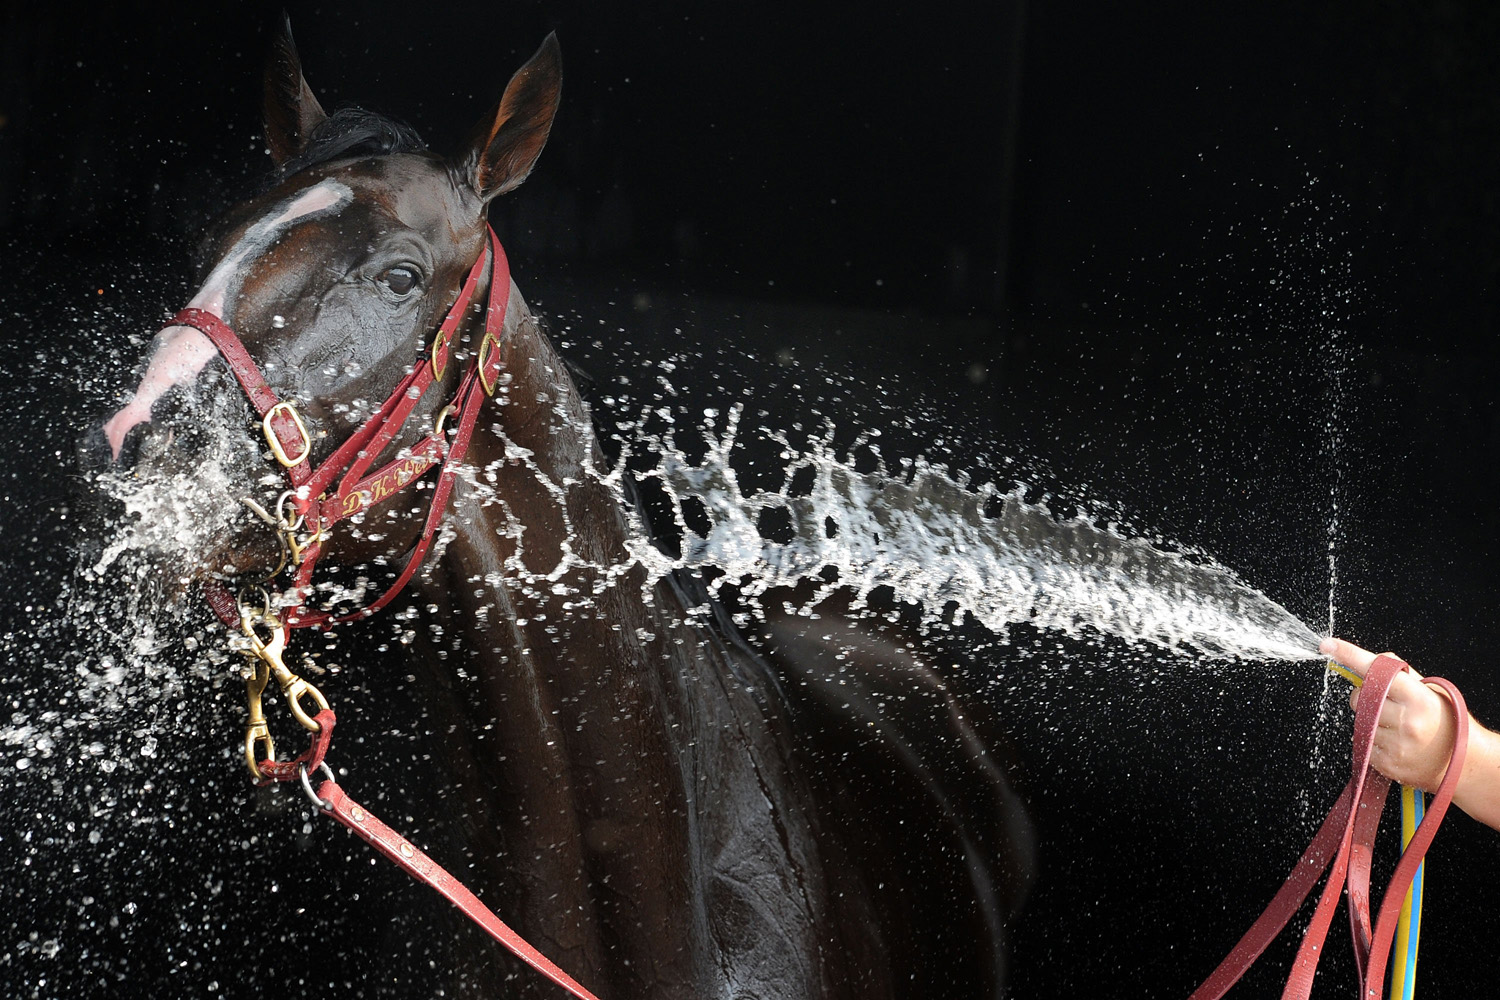 Feb. 12, 2014. Prince of Penzance is cooled down after Race 9, the Sportingbet Mornington Cup during the 2014 Mornington Cup Day in Melbourne, Australia.